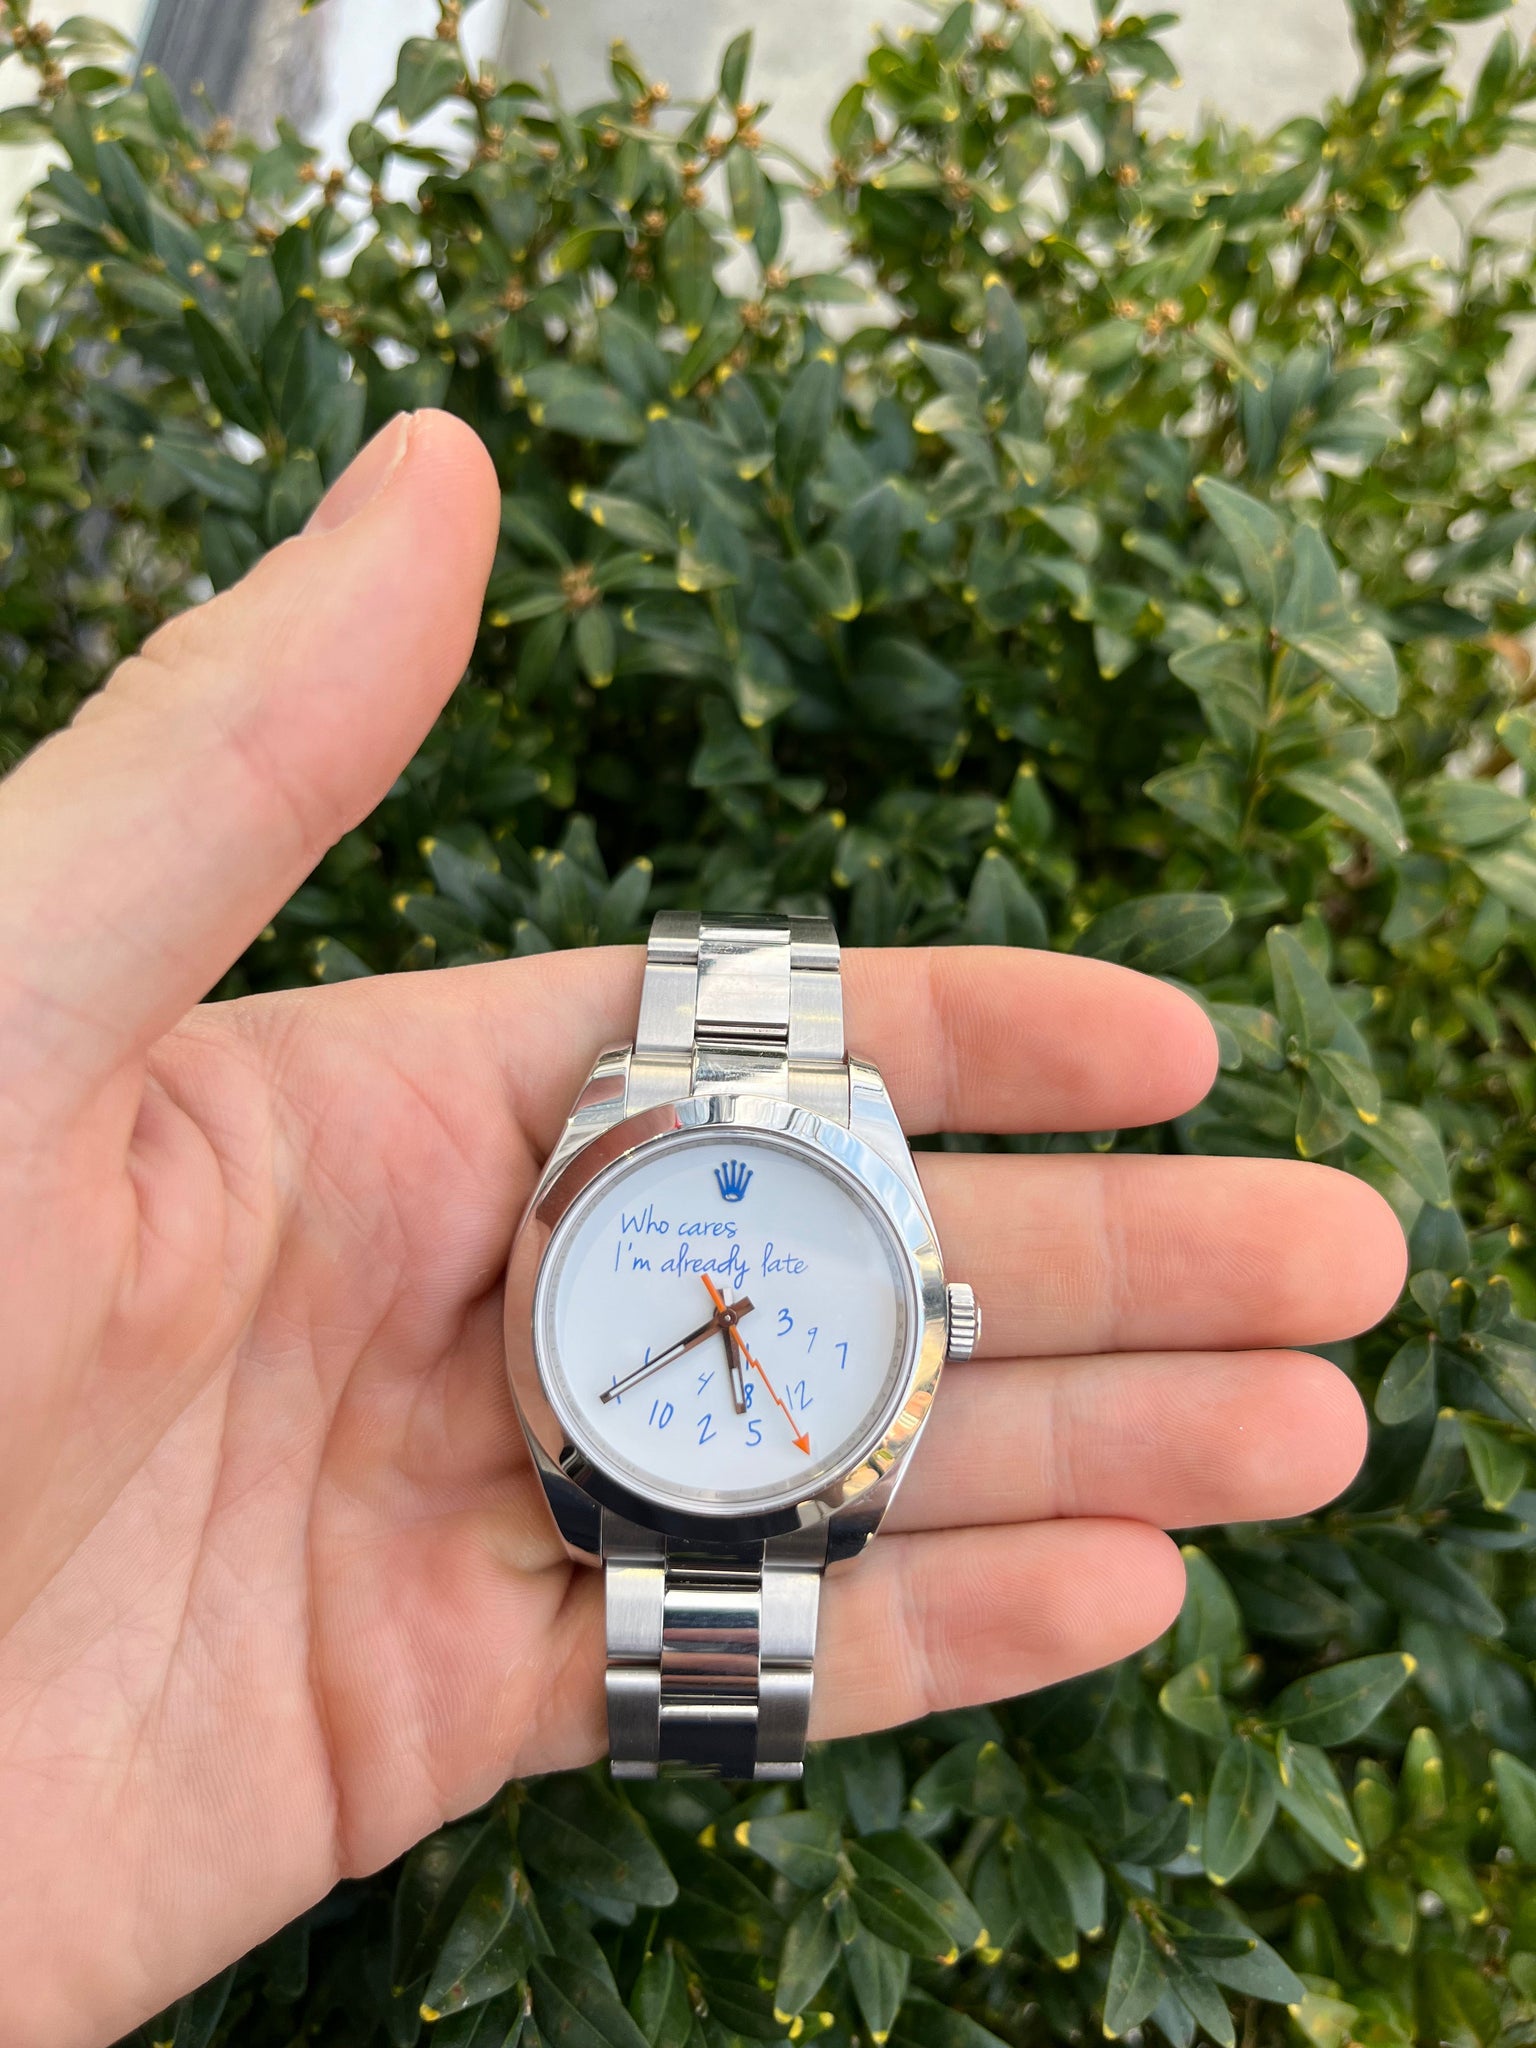 Exclusive 40mm Rolex Milgauss "Who cares I'm already late" custom dial blue font IV